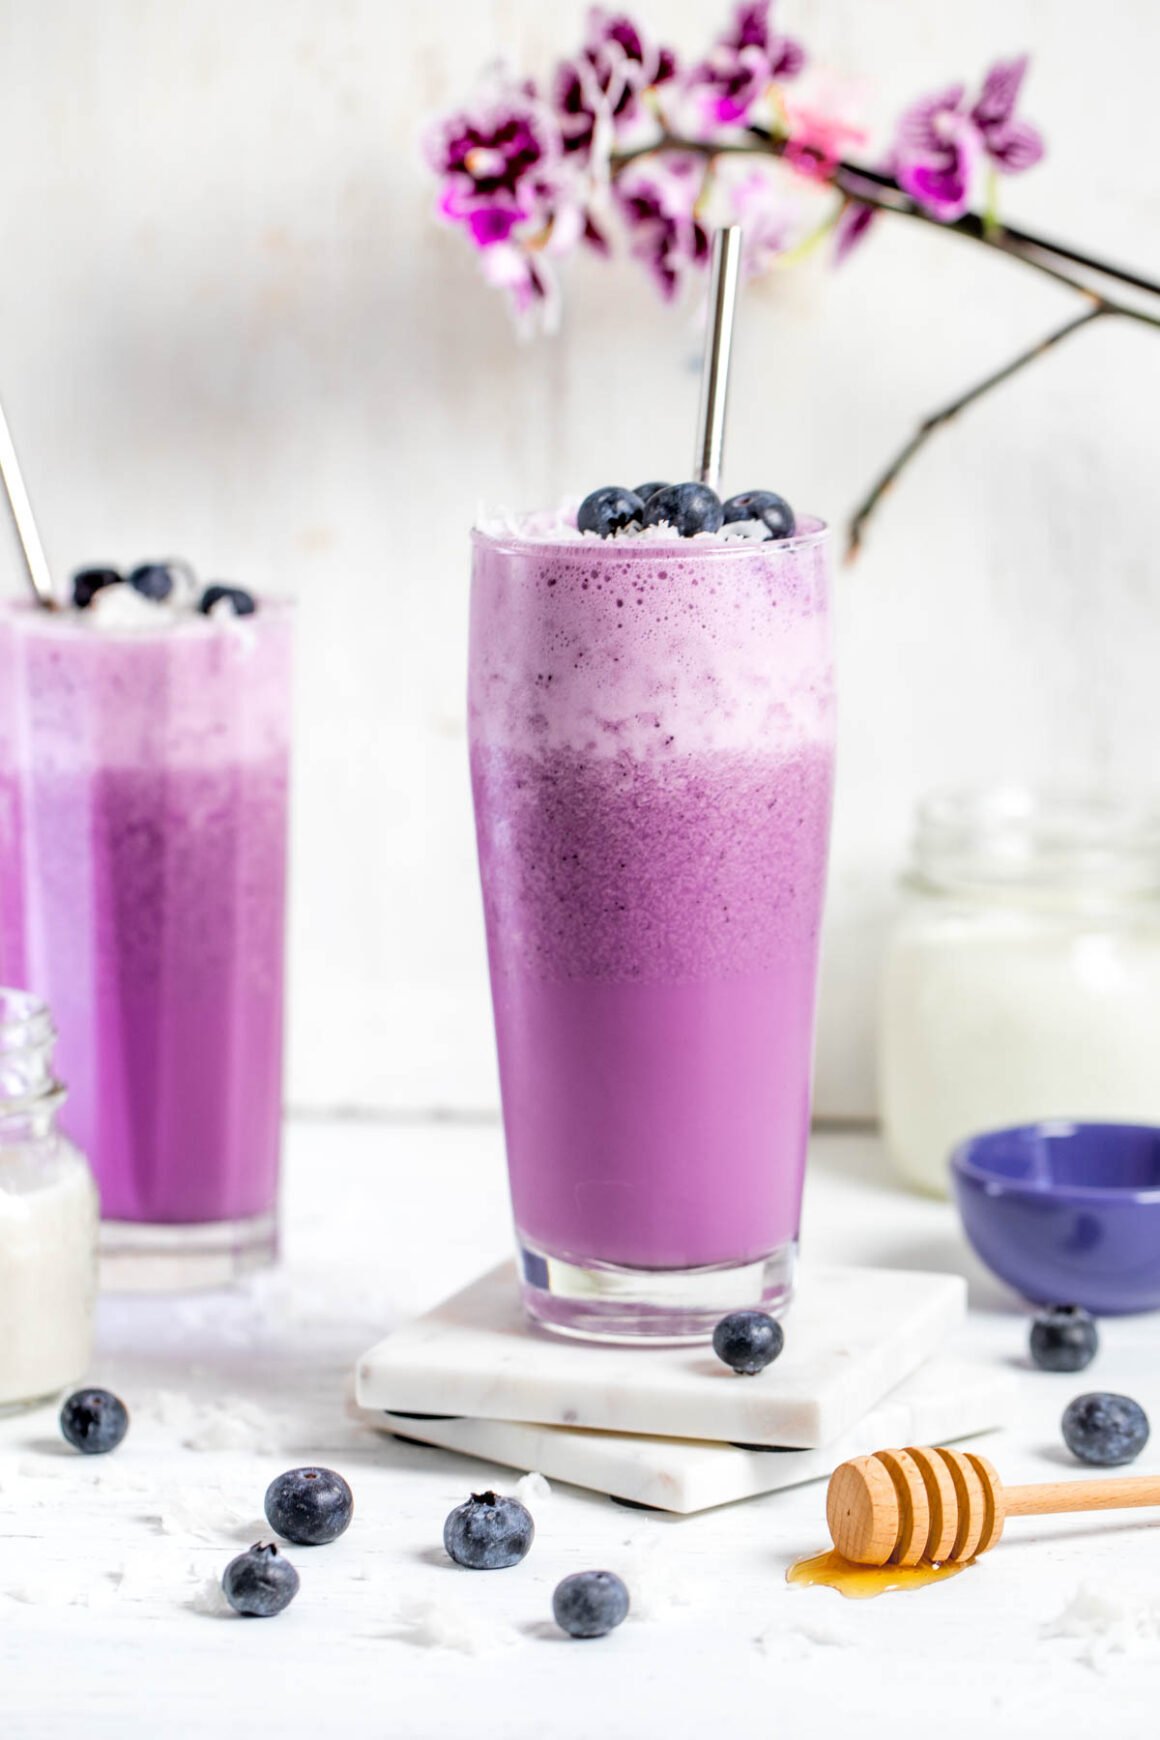 2 blueberry smoothie with a purple color 